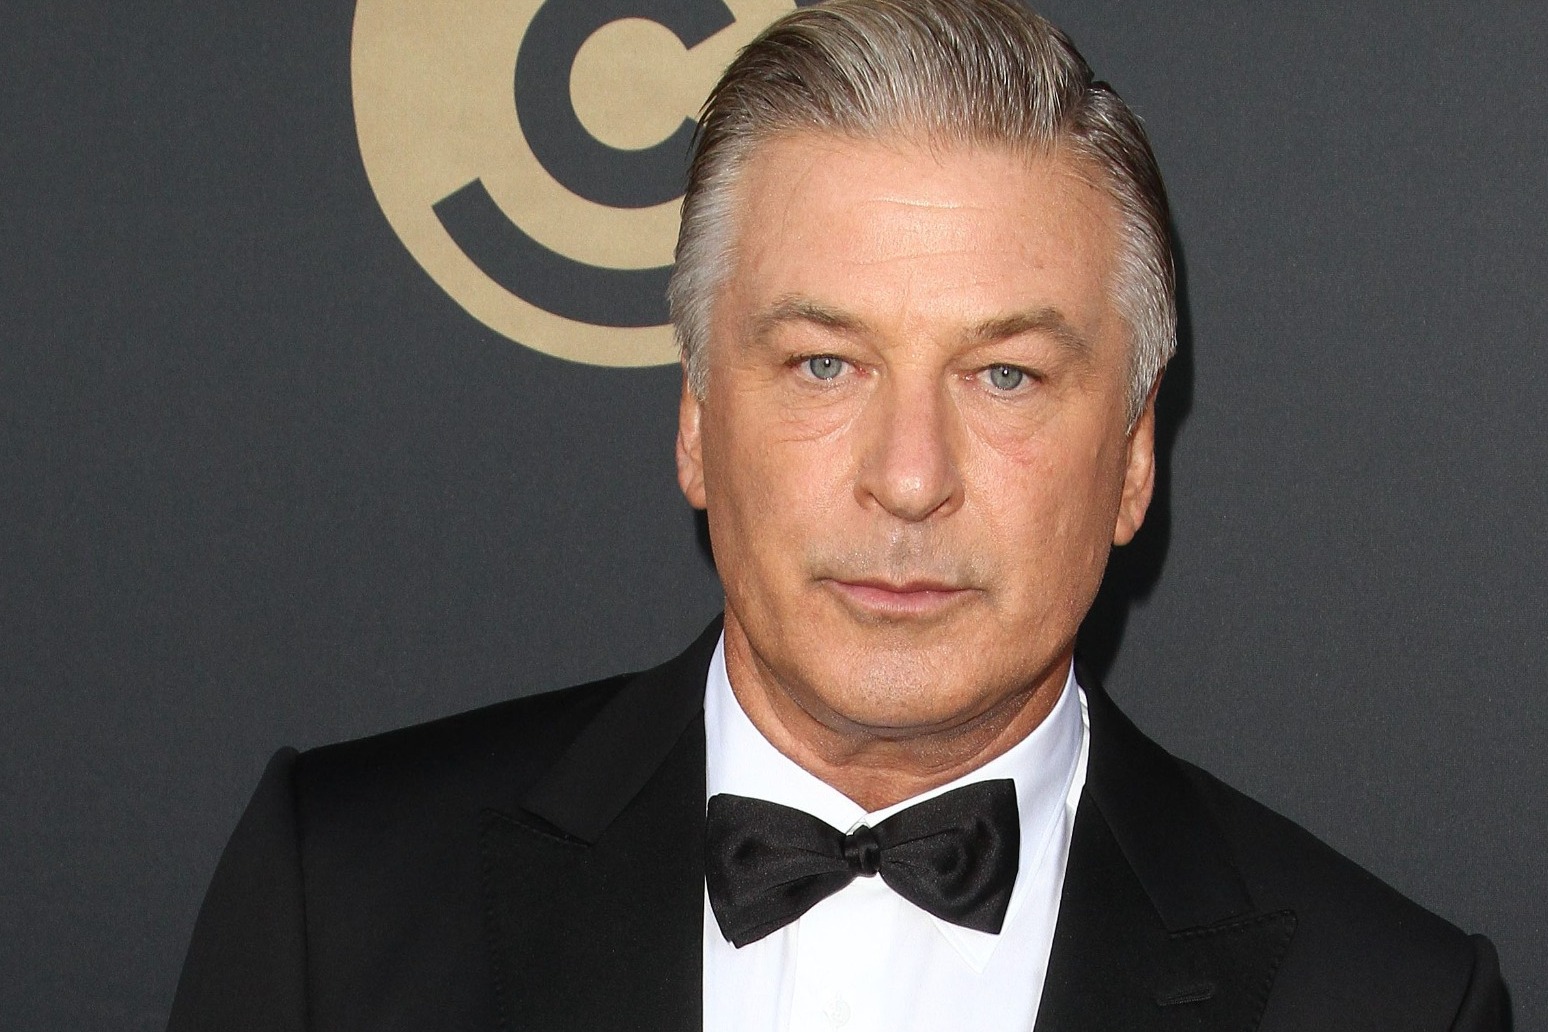 Alec Baldwin did not know weapon contained live ammunition, court documents show 